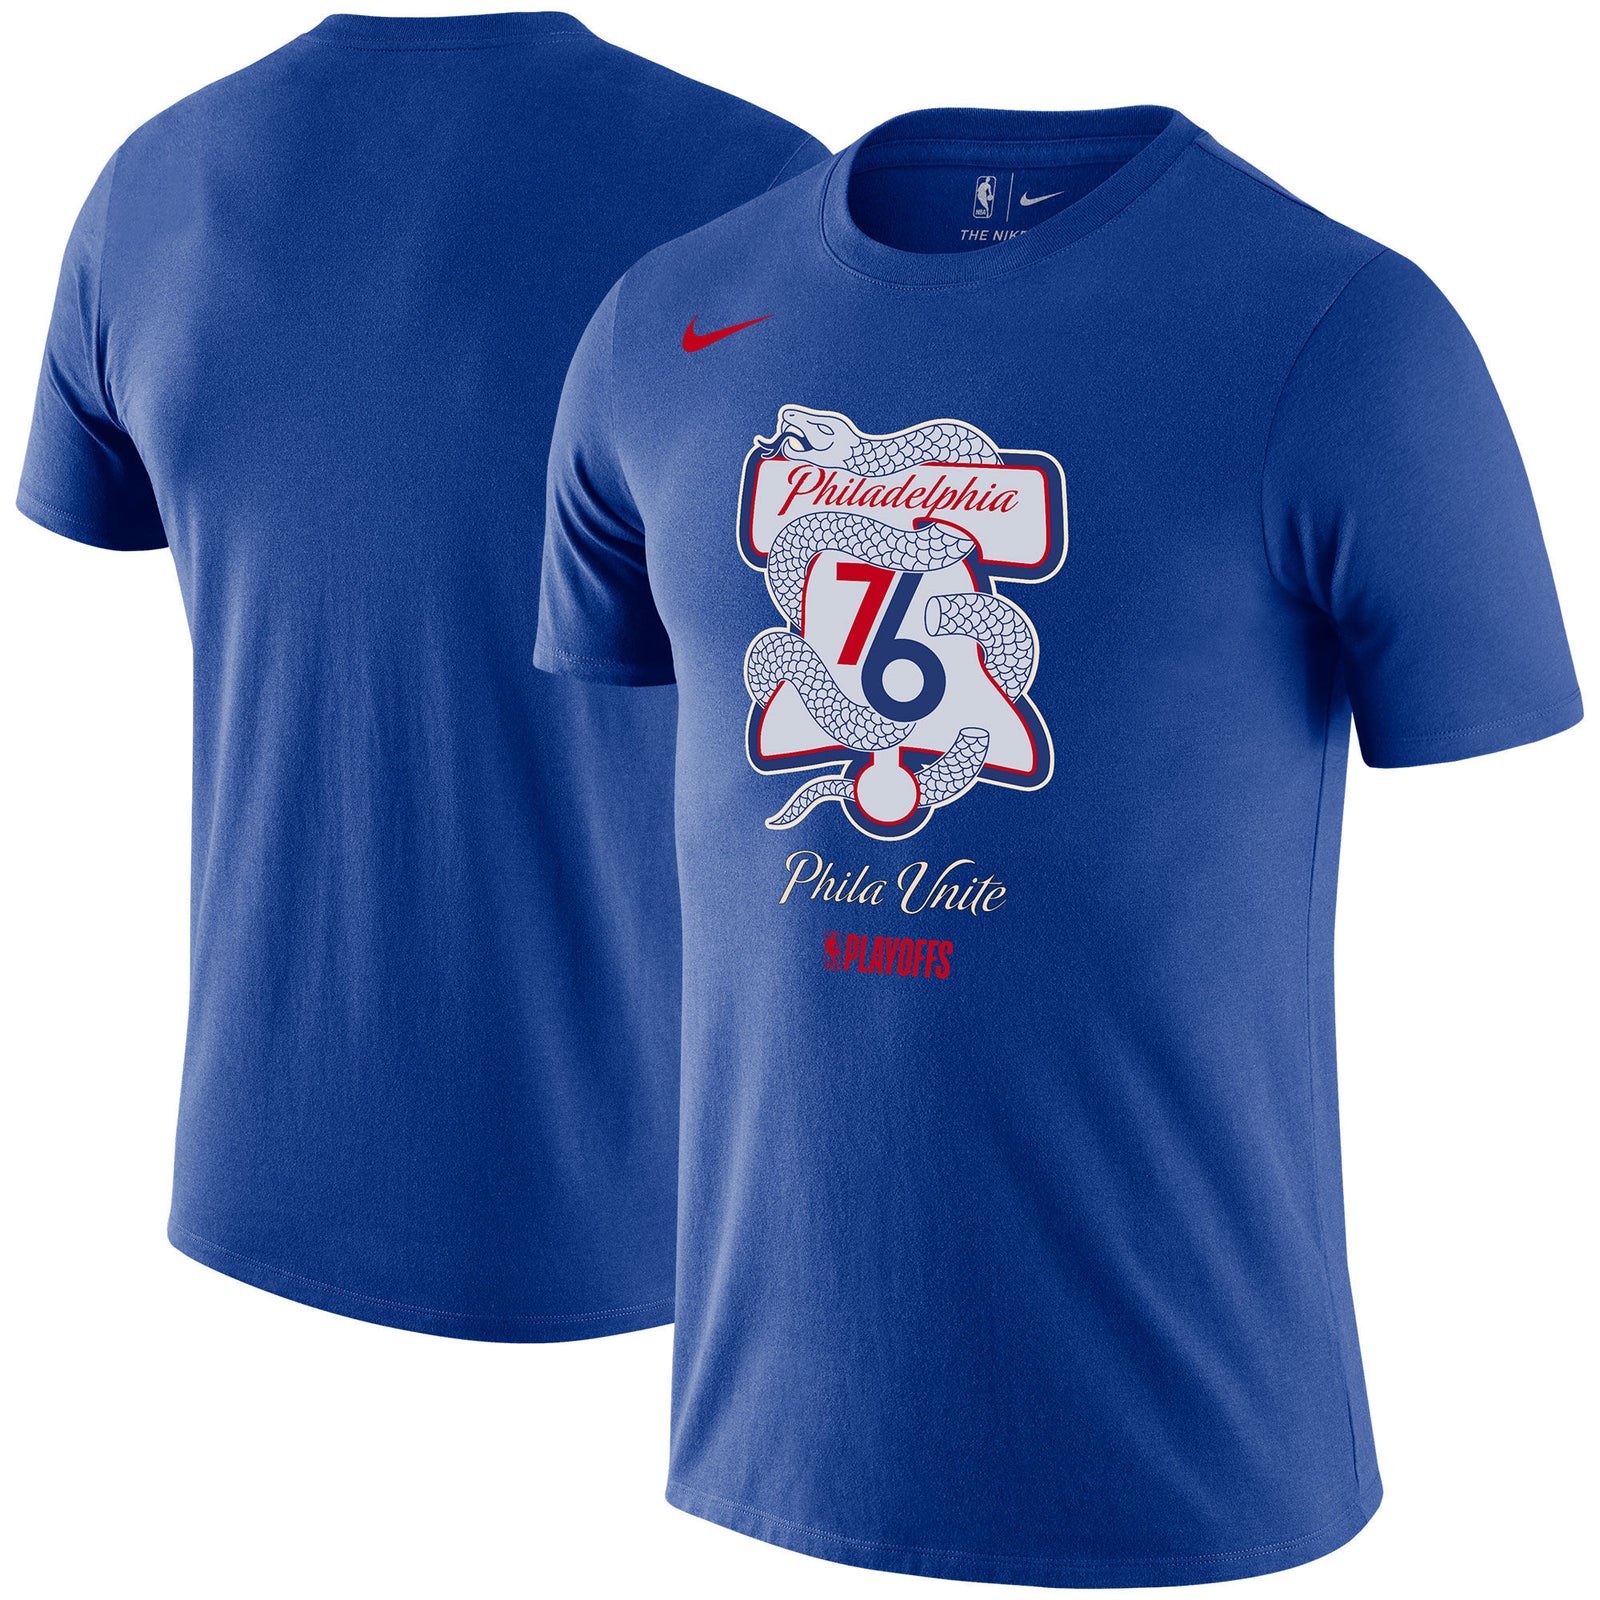 The Famous Sixers Playoff Shirt Generation T